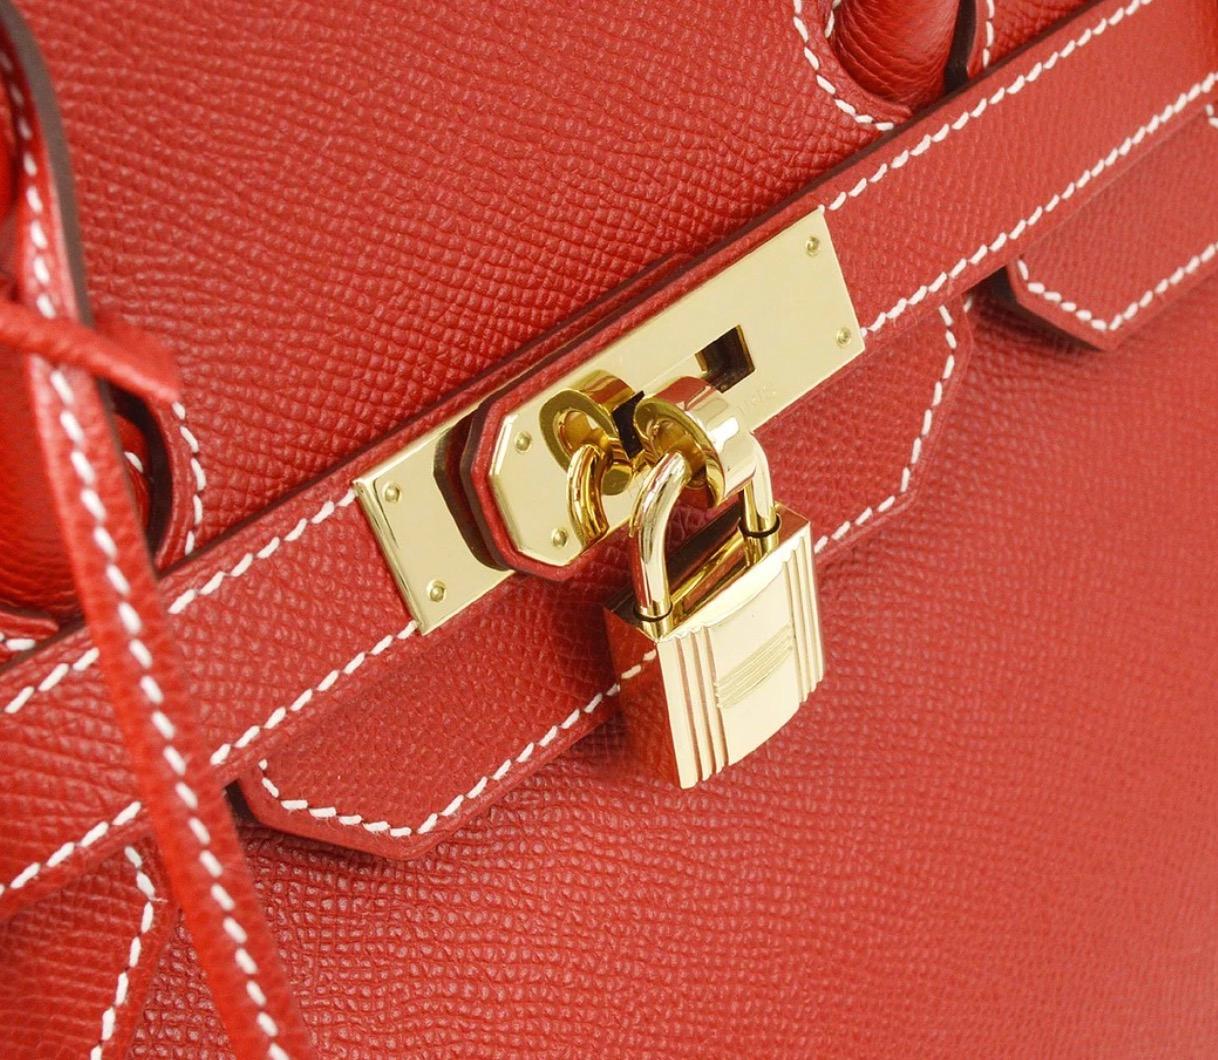 Leather
Gold tone hardware
Leather lining
Turn-lock closure
Date code present
Made in France
Handle drop 4